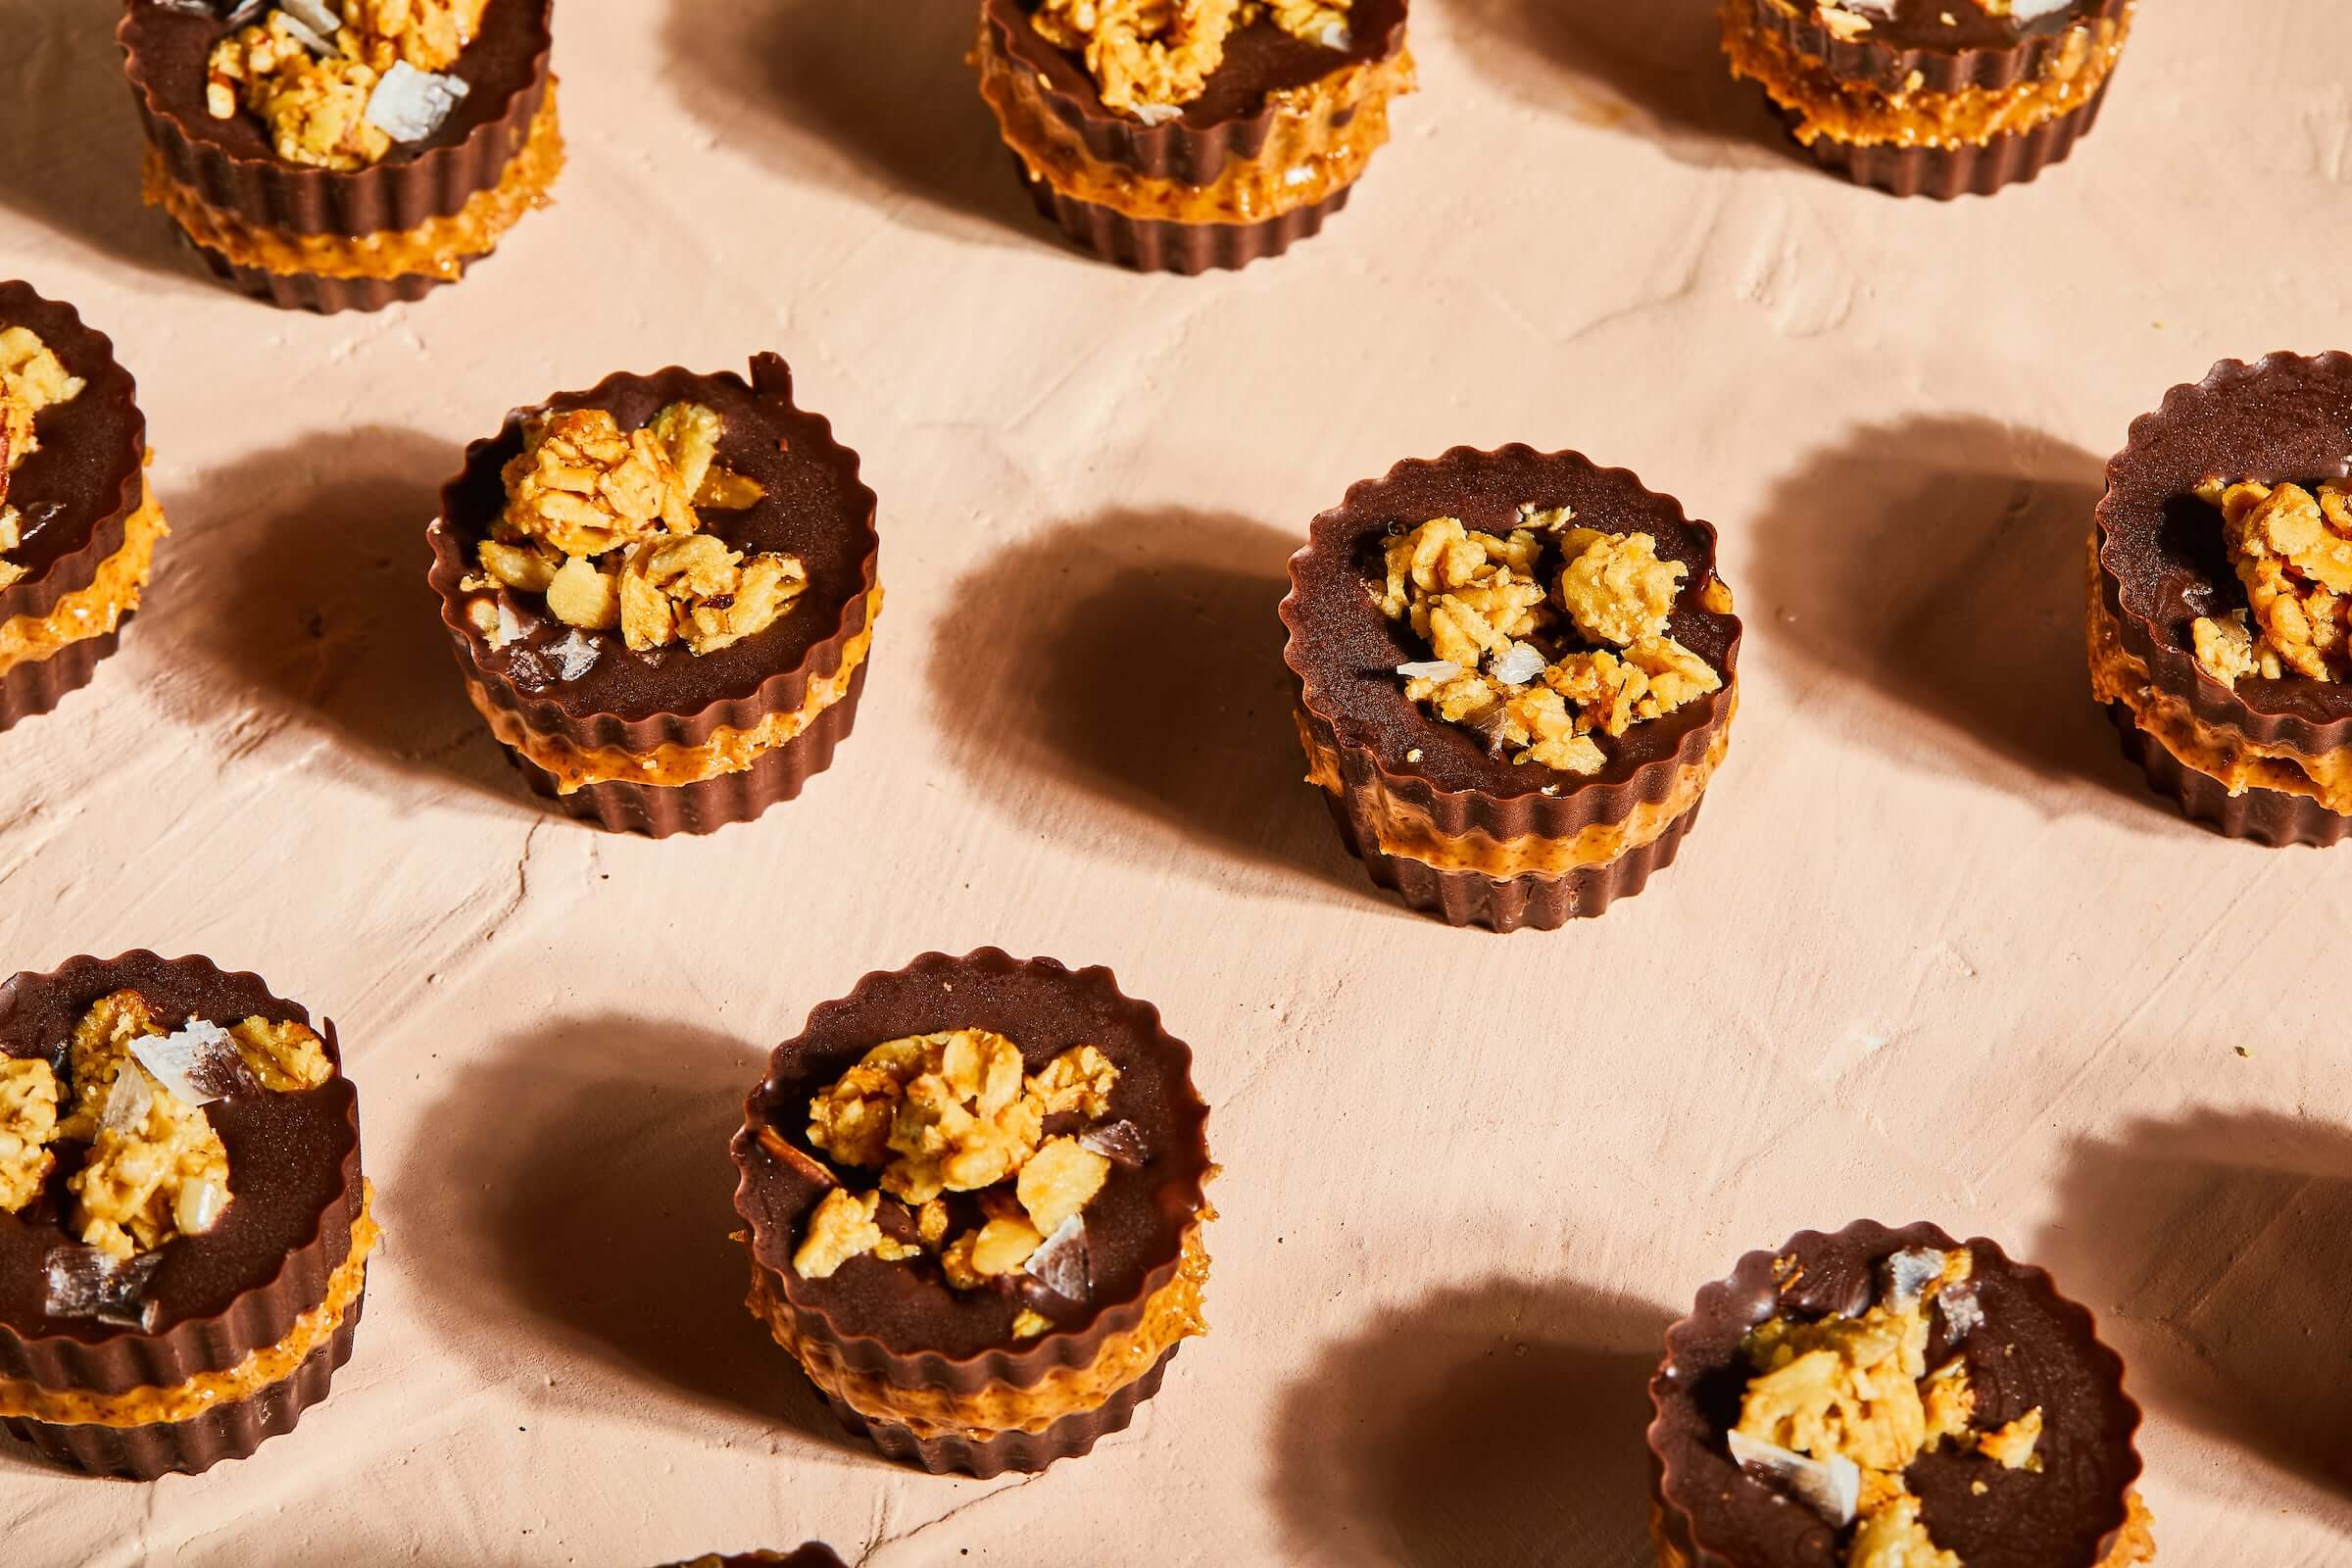 Oat & Nut Butter Cup recipe - granola butter enrobed in chocolate